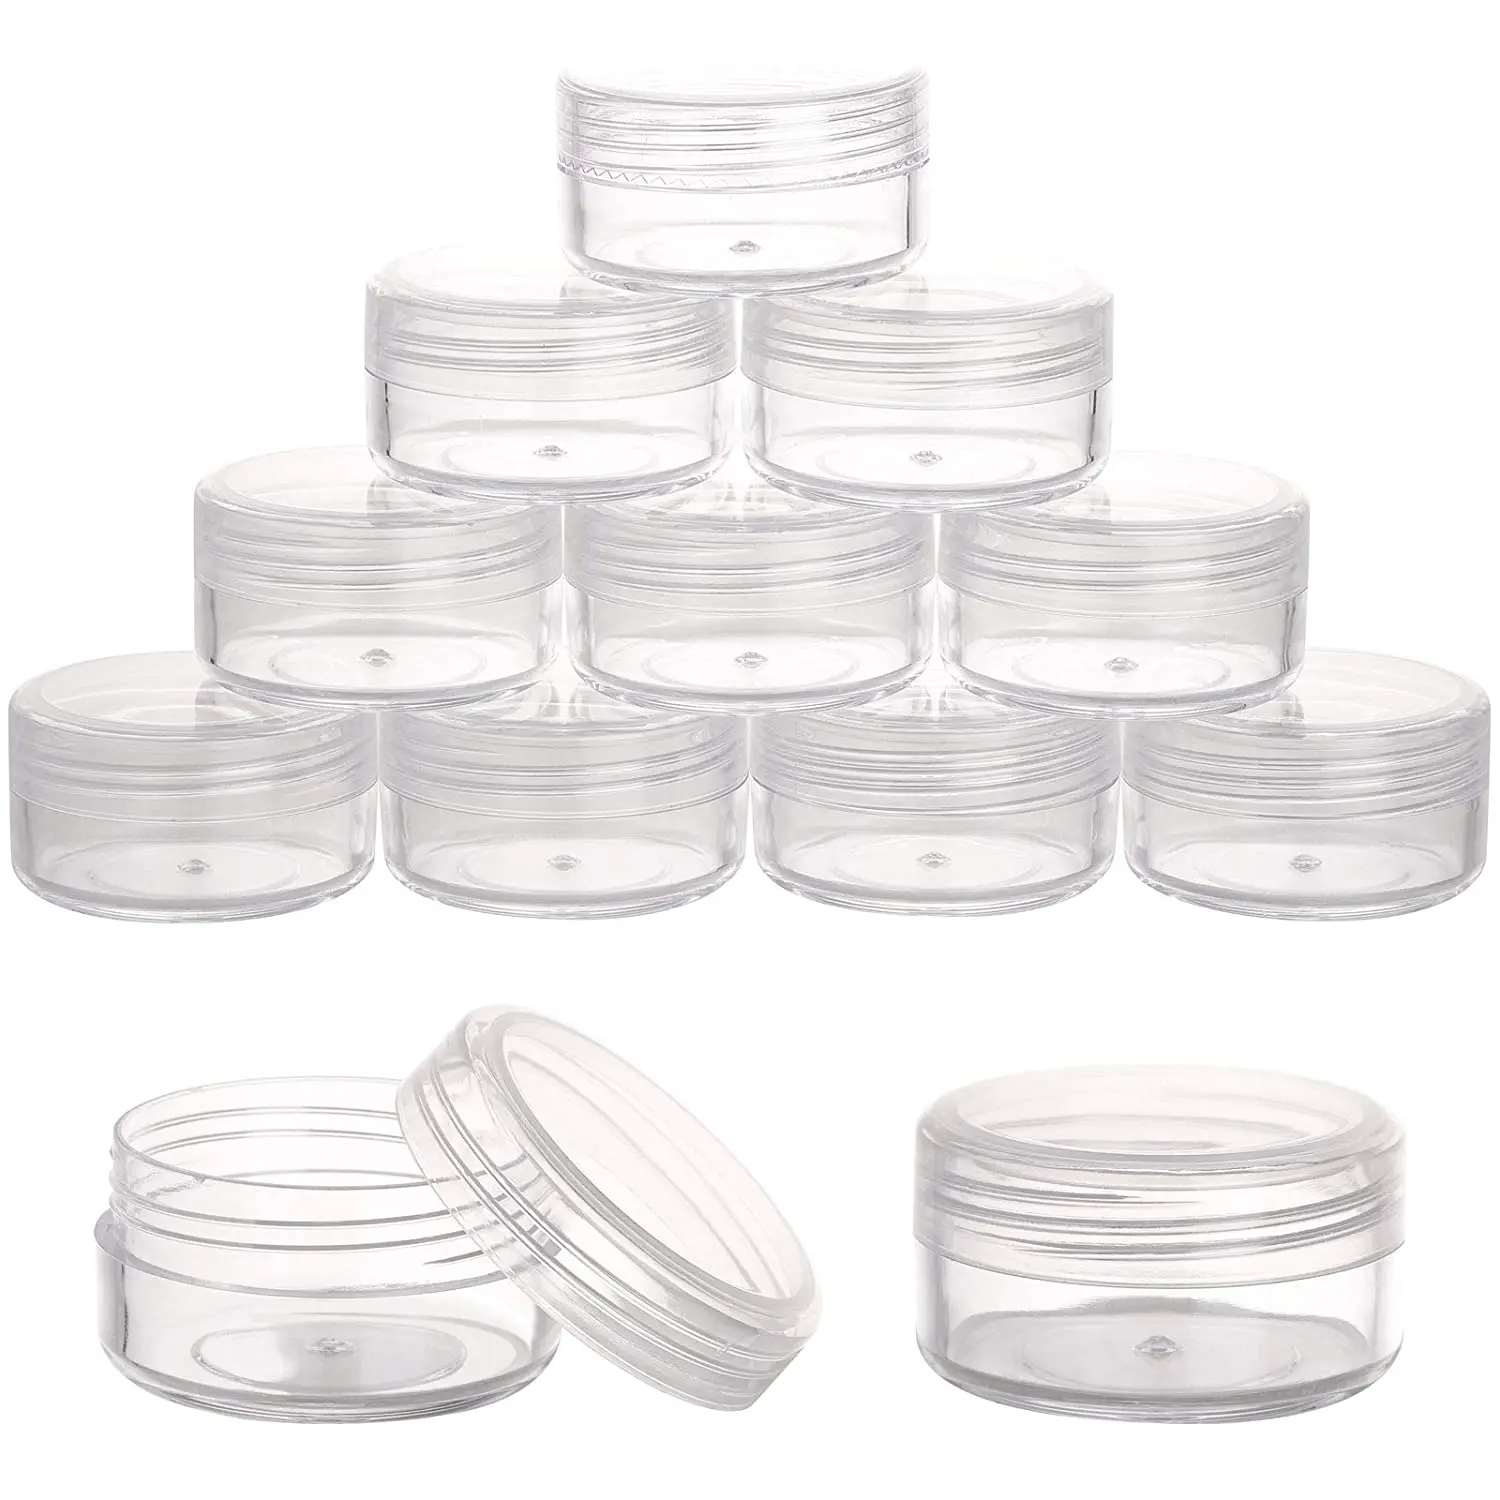 https://ae01.alicdn.com/kf/Sa4e01d00d57f4a6aacedb1388a91e2f6v/12PCS-3g-Empty-Clear-Plastic-Sample-Containers-with-Lids-Cosmetic-Pot-Jars-Small-Containers-for-Lip.jpg